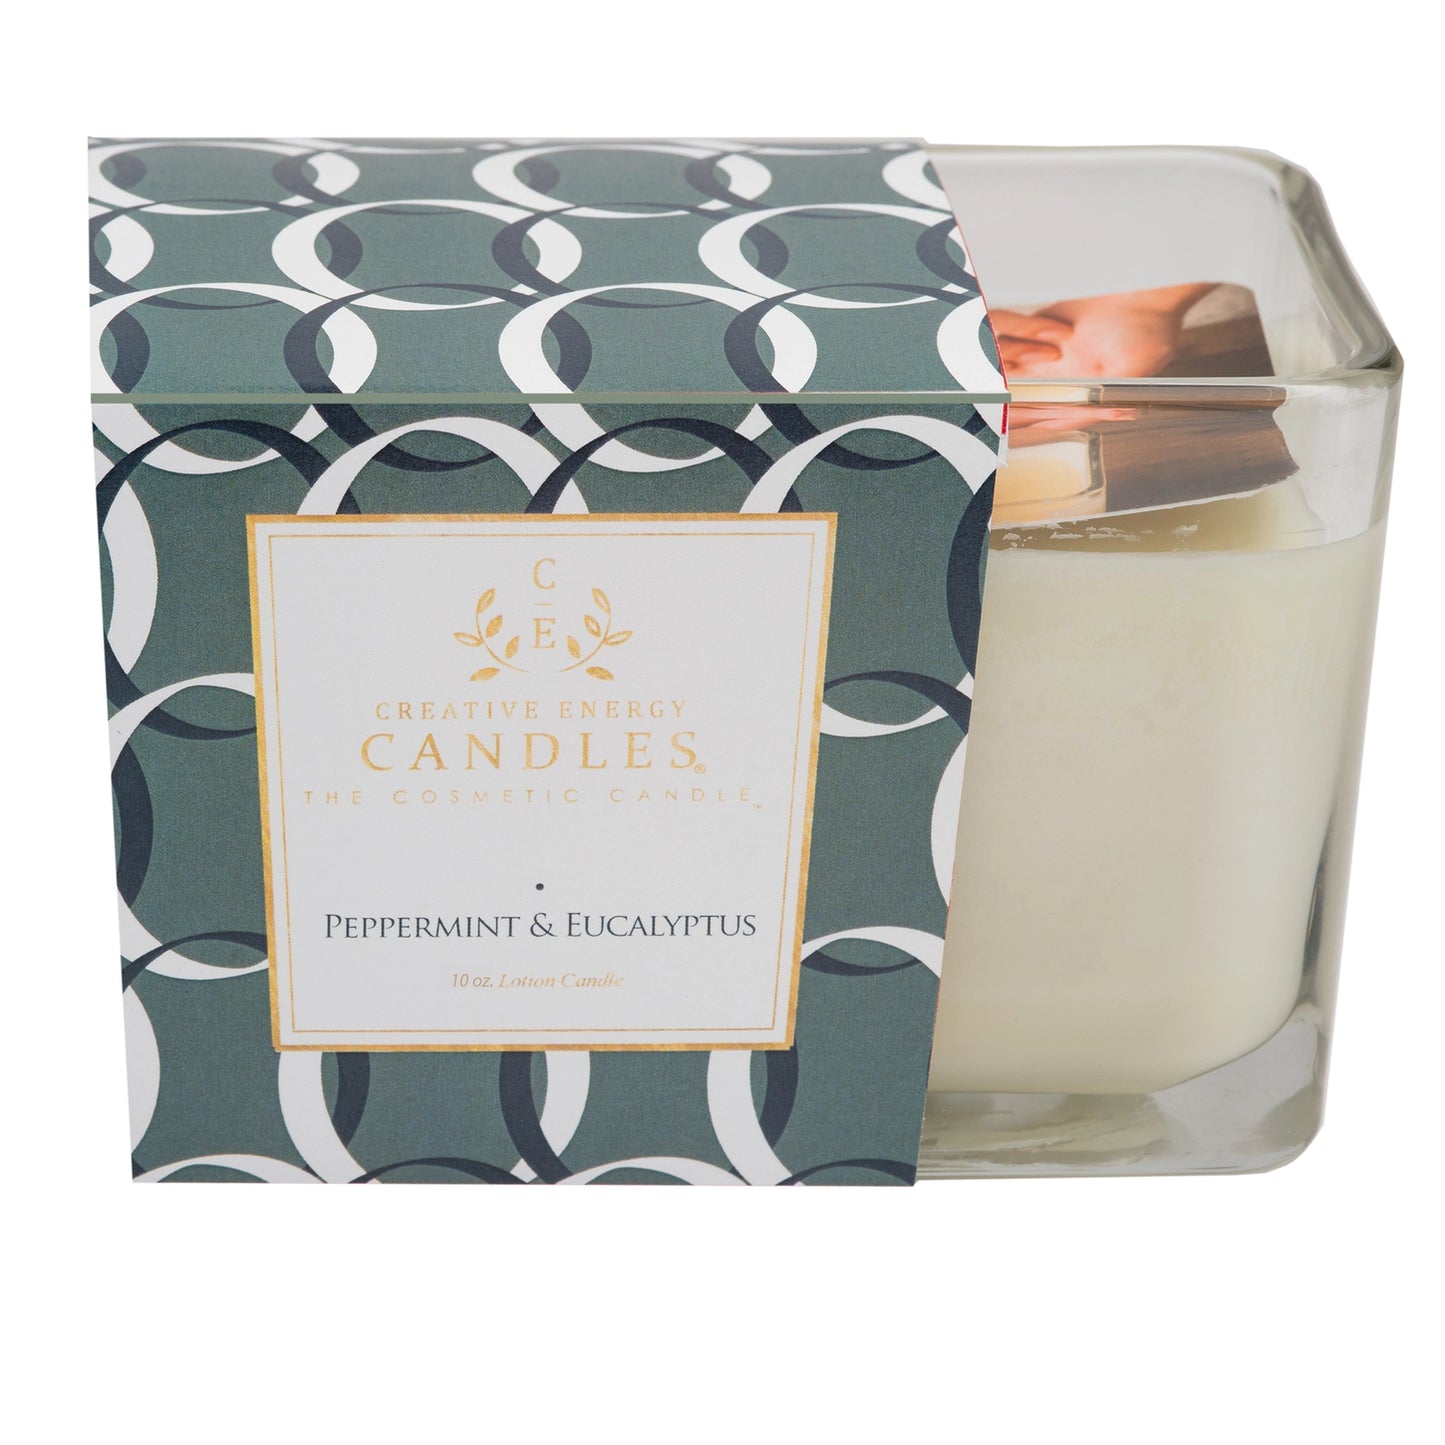 Peppermint & Eucalyptus:2-in-1 Soy Lotion Candle Medium 6 oz